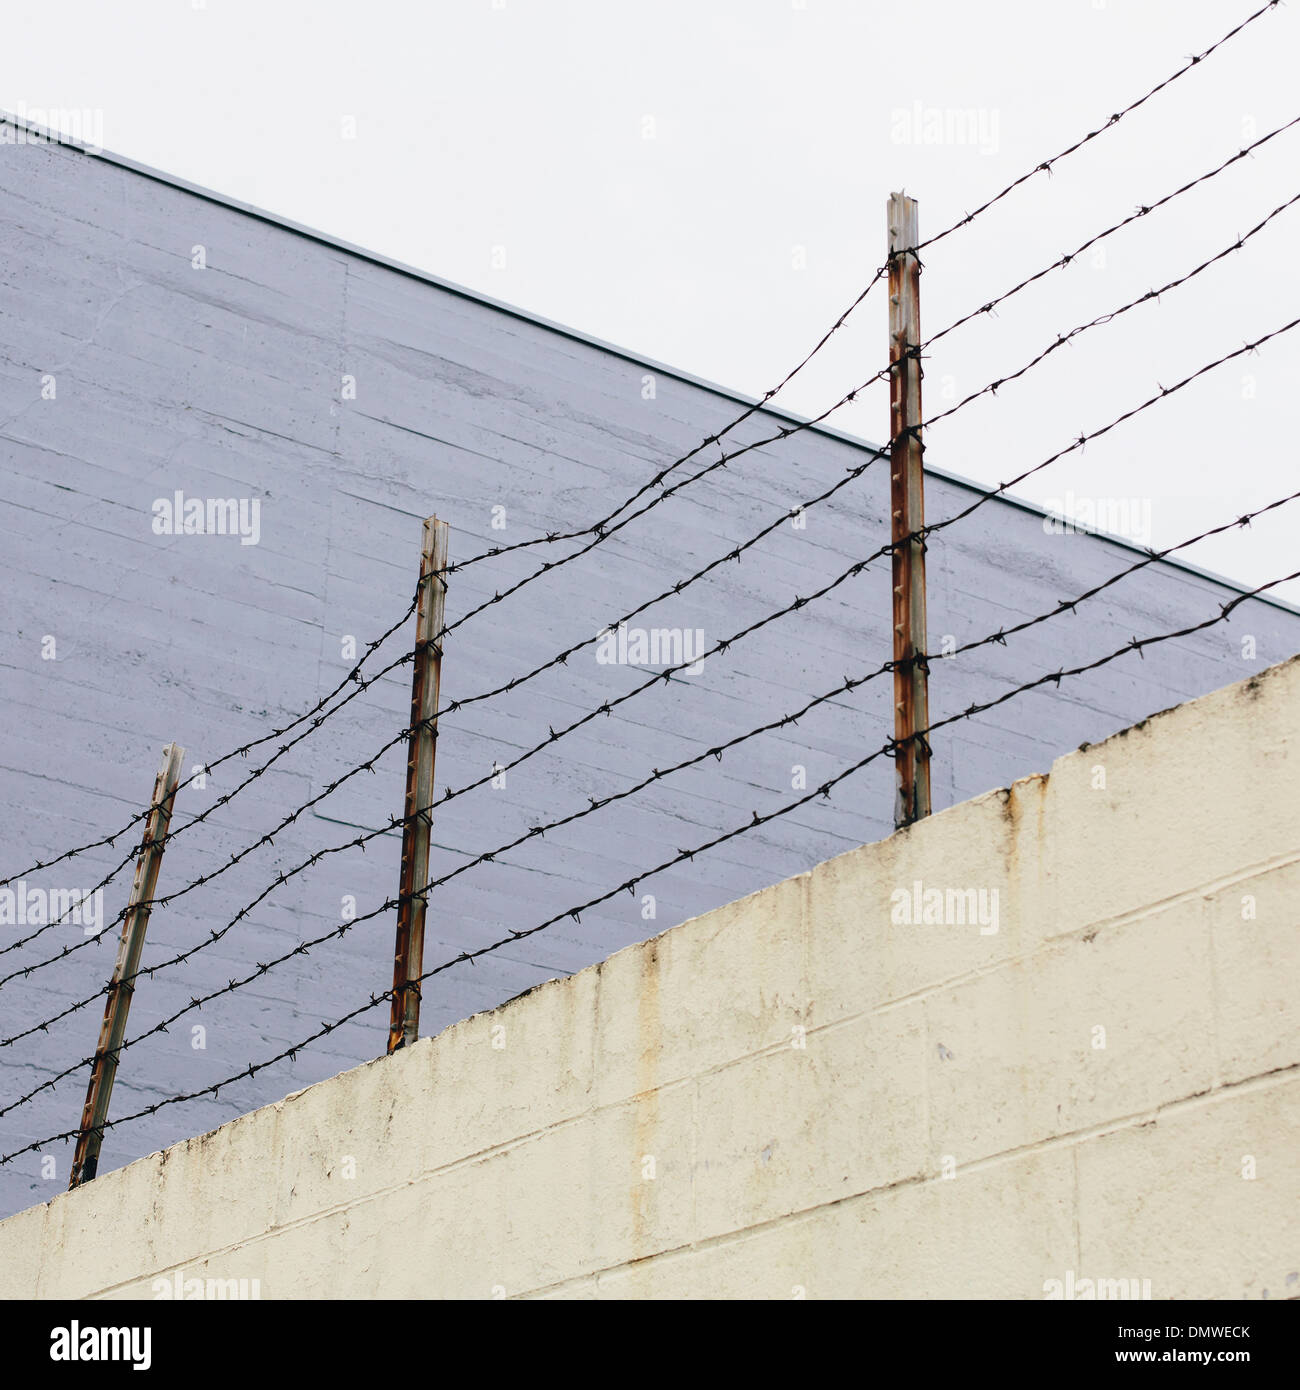 Barbed wire fence at  top of a wall in a city. Stock Photo